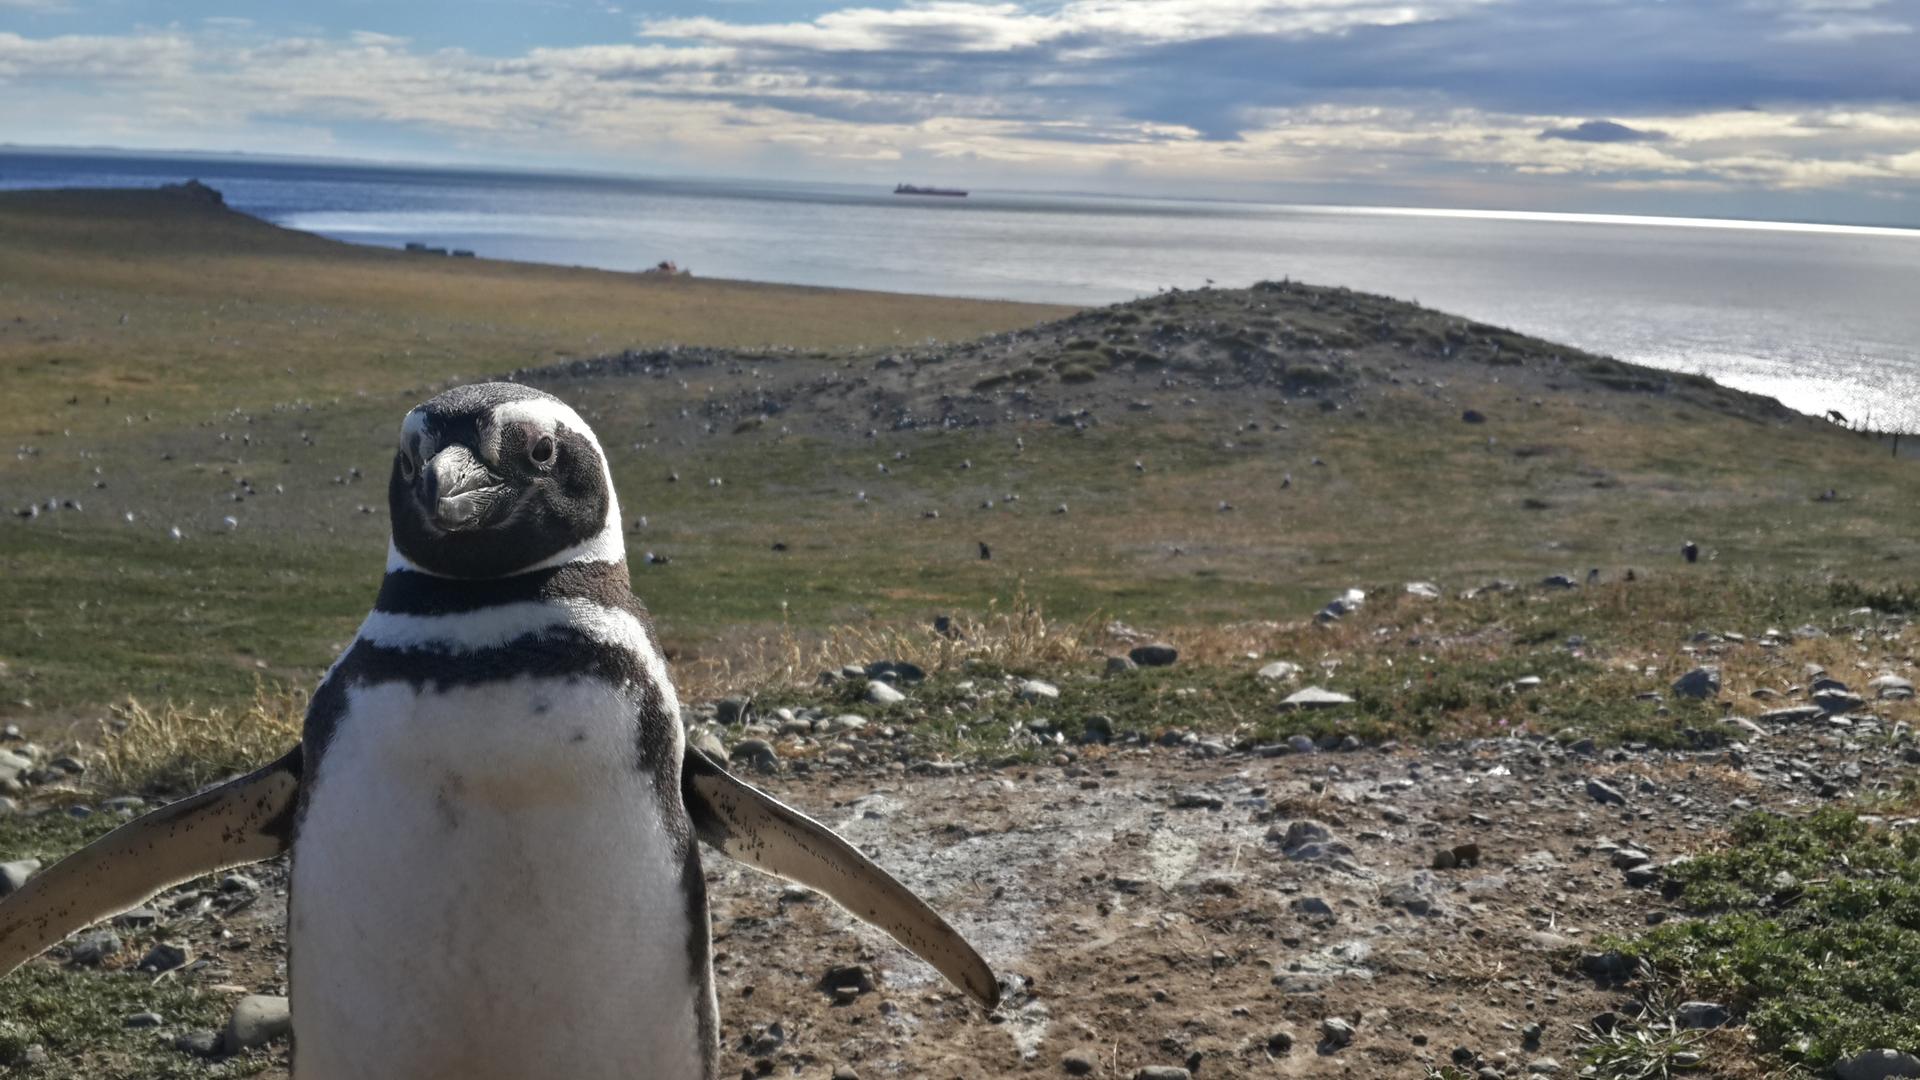 Magellan penguin, Punta Arenas, Chile. The penguins were living in small holes in the ground.